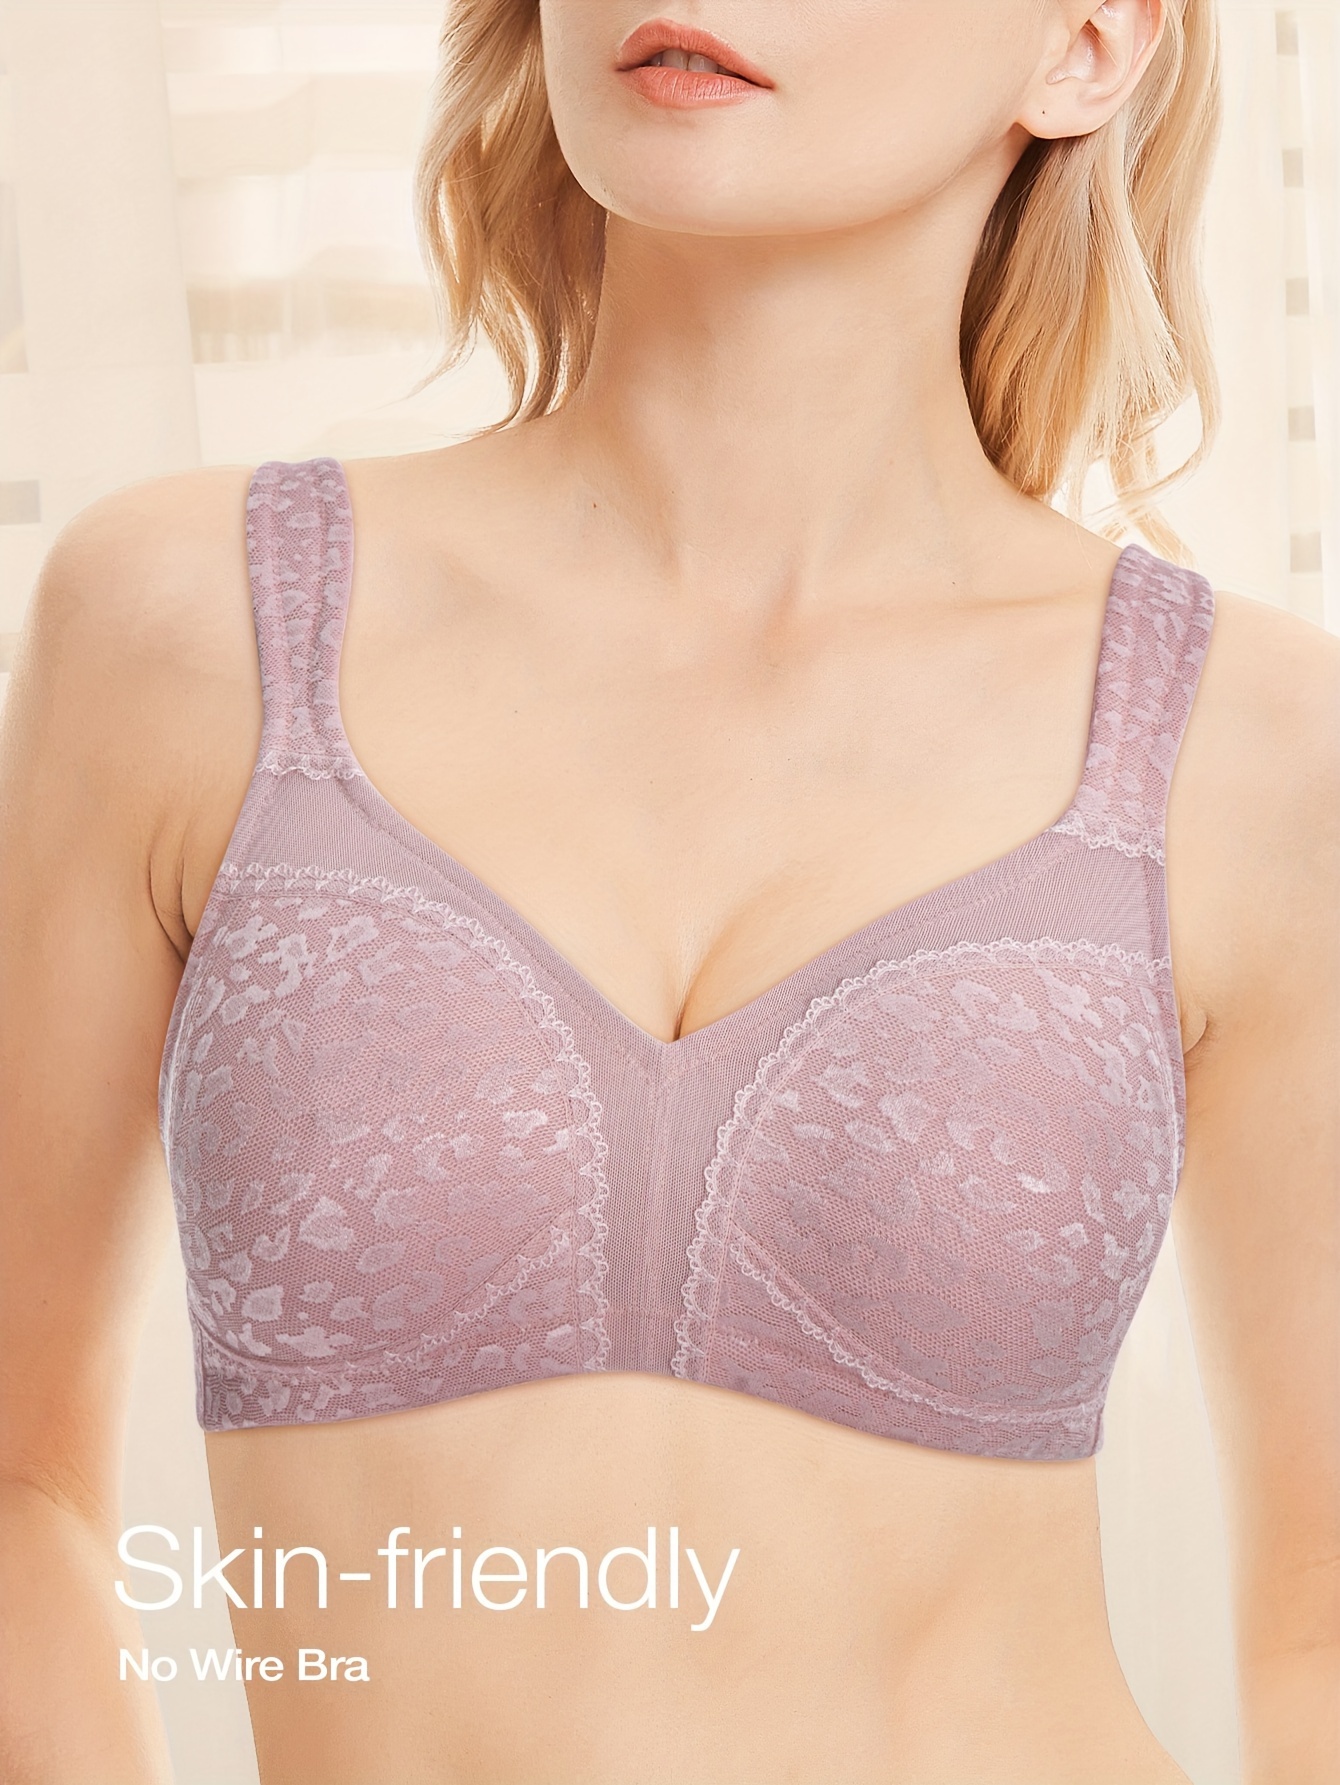 Jacquard Solid Mesh Bras, Comfy & Breathable Everyday Intimates Bra,  Women's Lingerie & Underwear